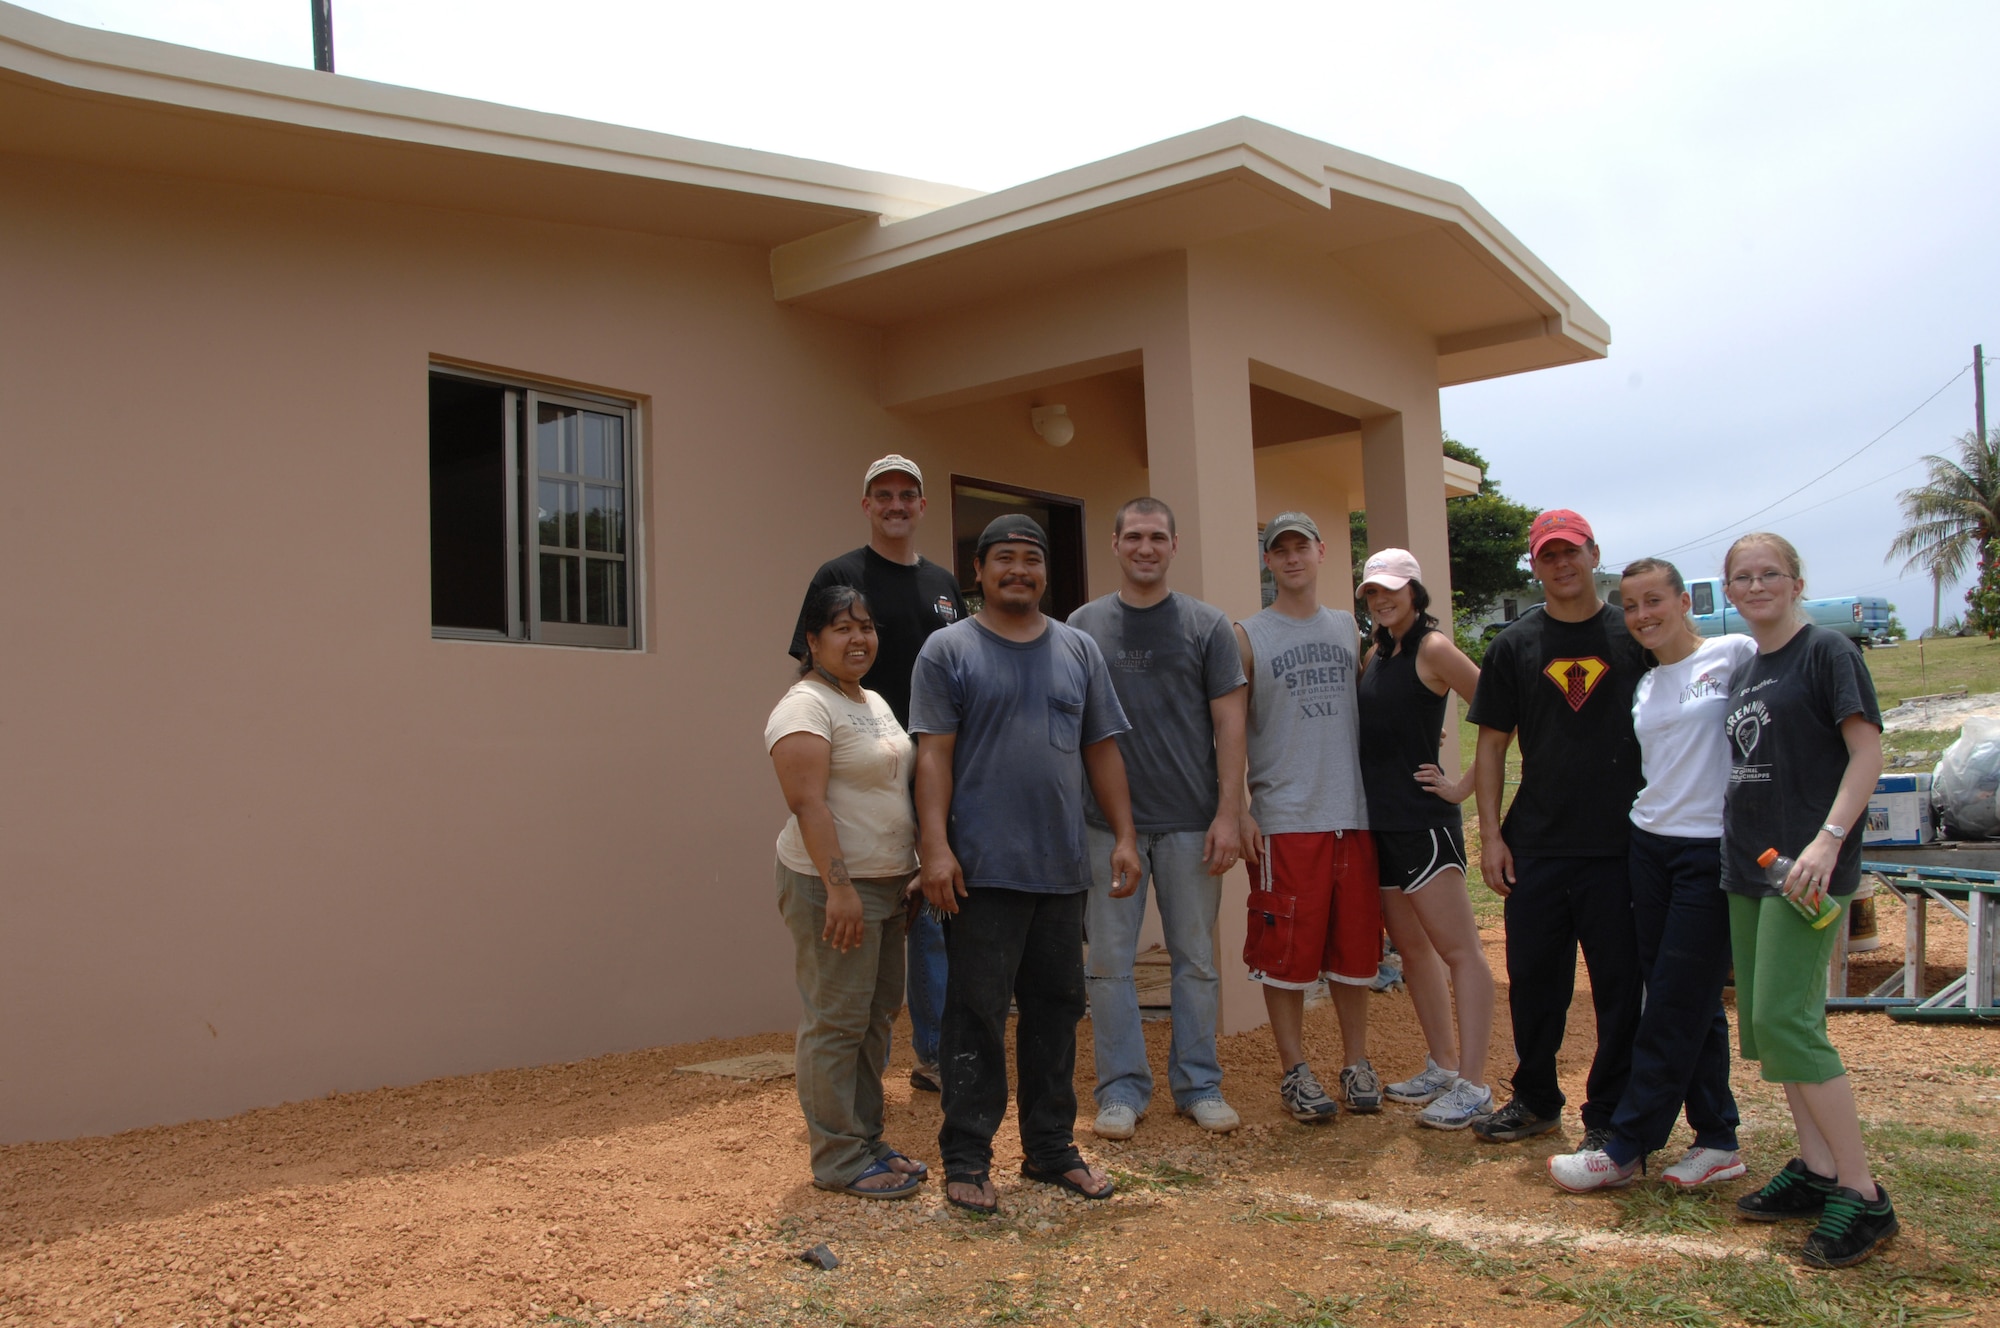 Volunteers from the 36th Operations Support Squadron pause from their construction efforts with the Habitat for Humanity July 11to stand in front of a newly renovated home Yona, Guam, with the family that will acquire it.  Habitat for Humanity is a program that provides homes for local families that are in need. (U.S. Air Force photo by Airman 1st Class Courtney Witt)